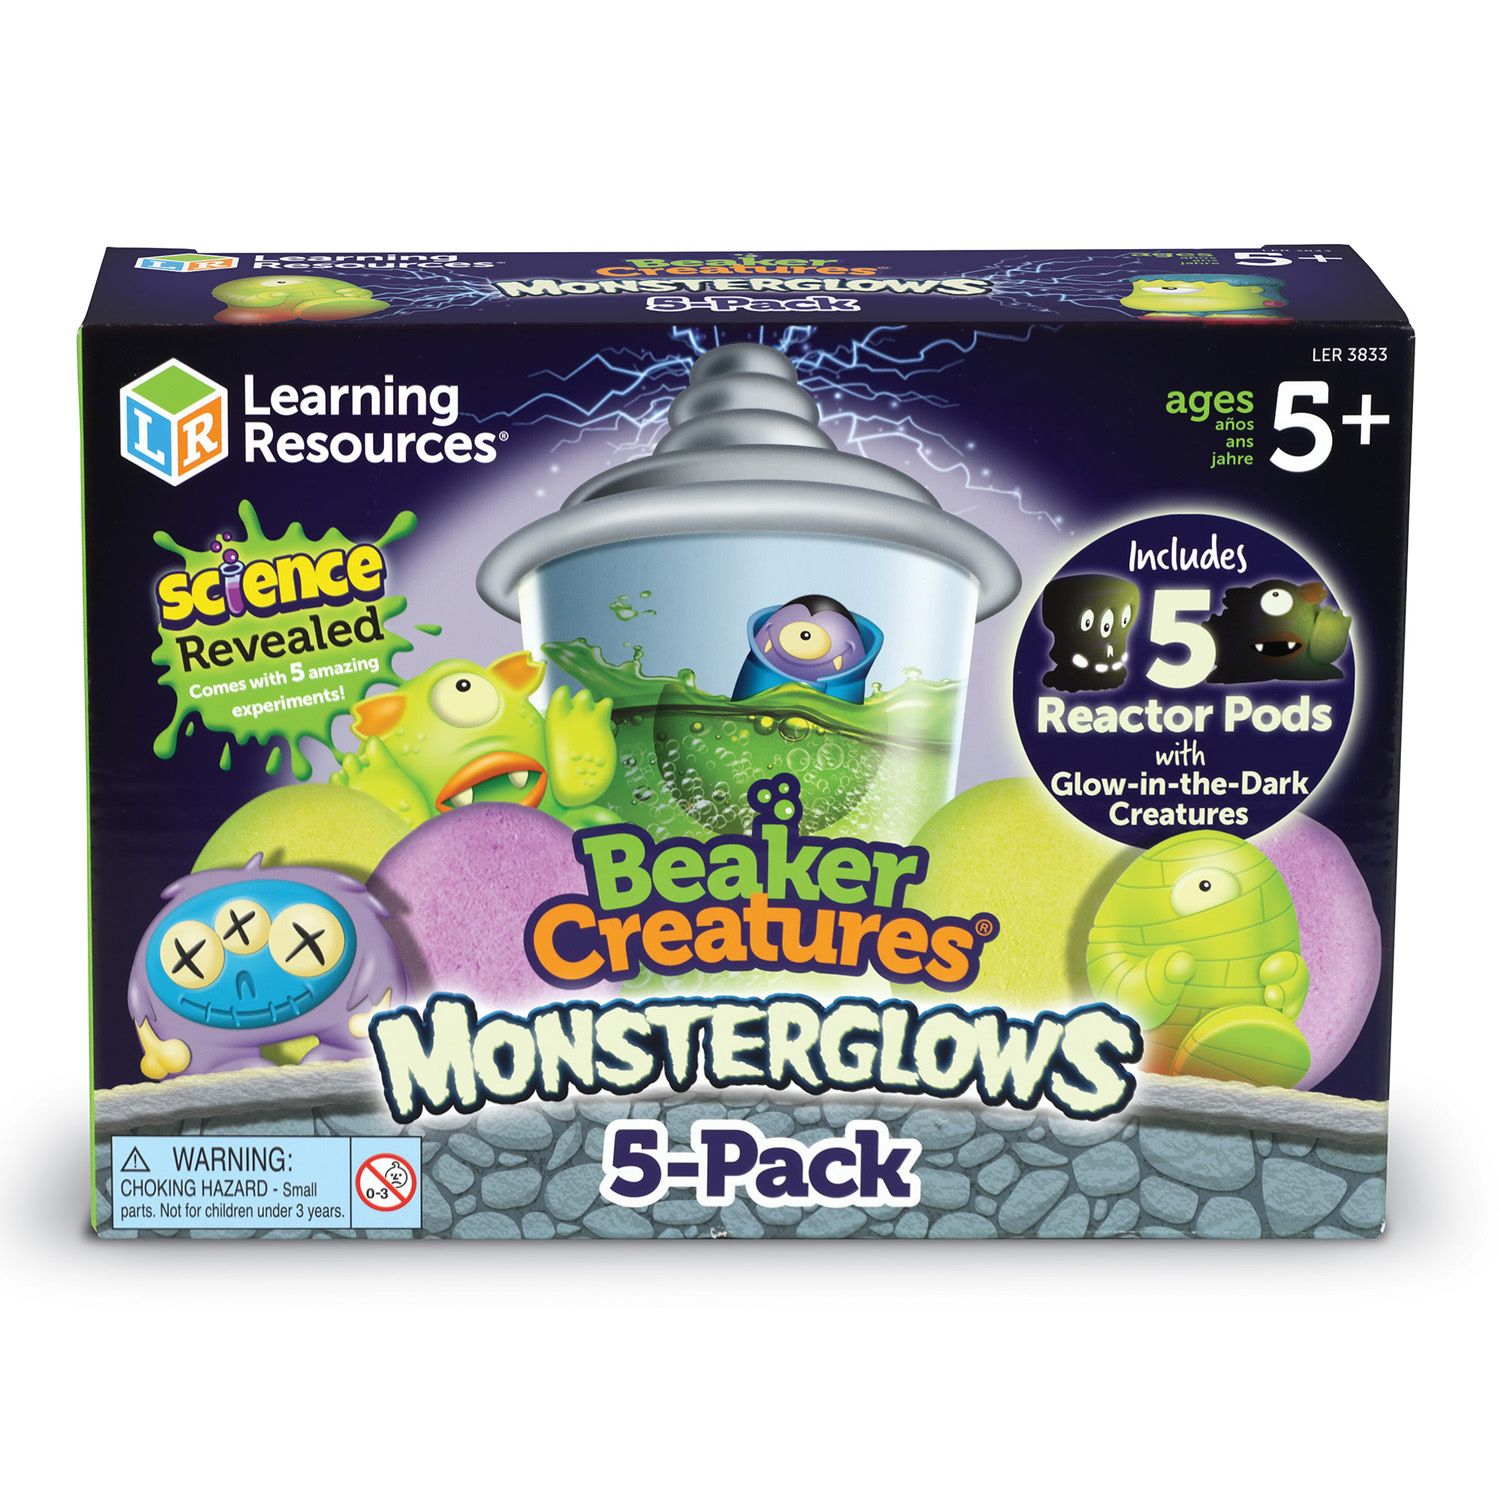 Image for Learning Resources Beaker Creatures 5-Pack Monsterglow at Kohl's.